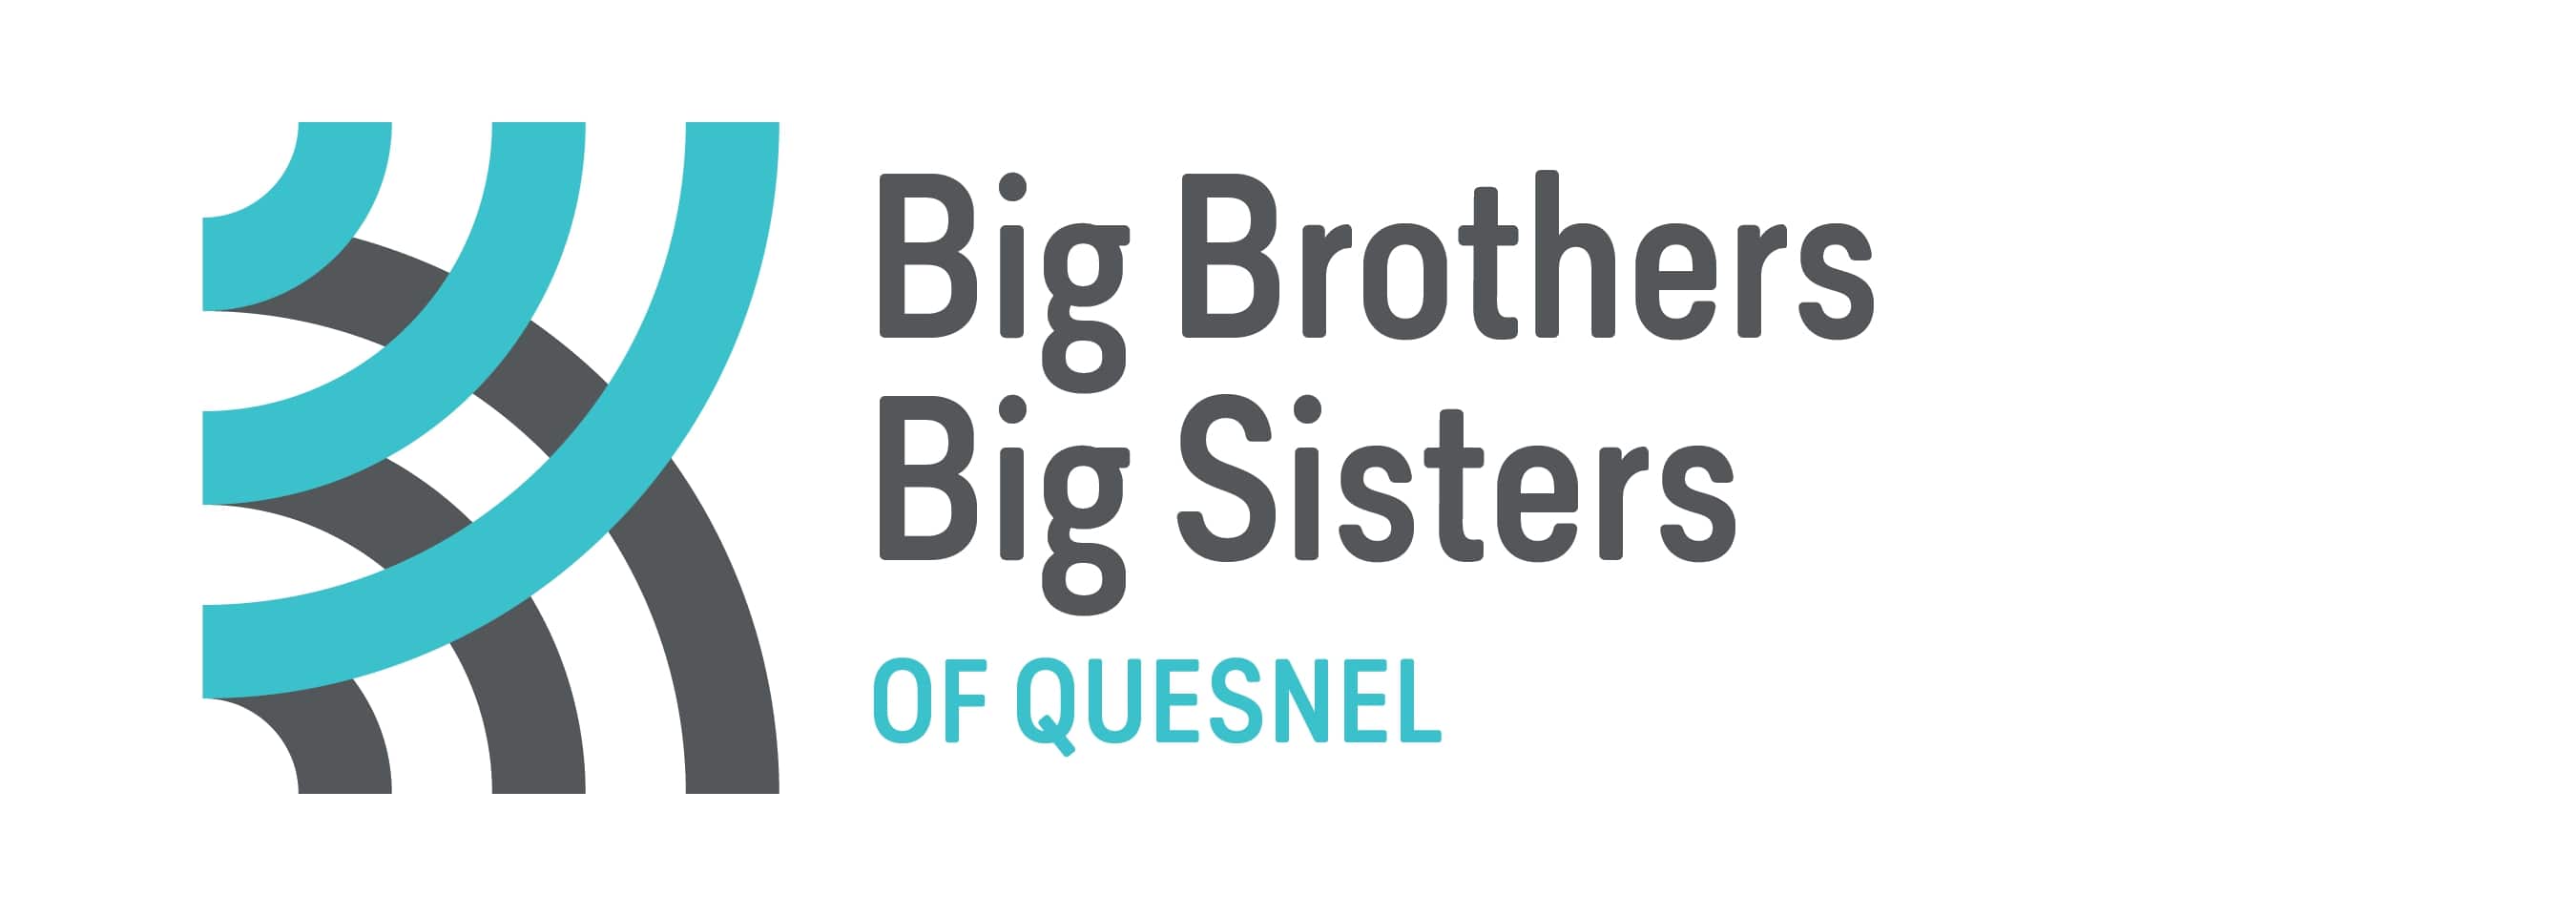 Big Brothers Big Sisters of Quesnel logo